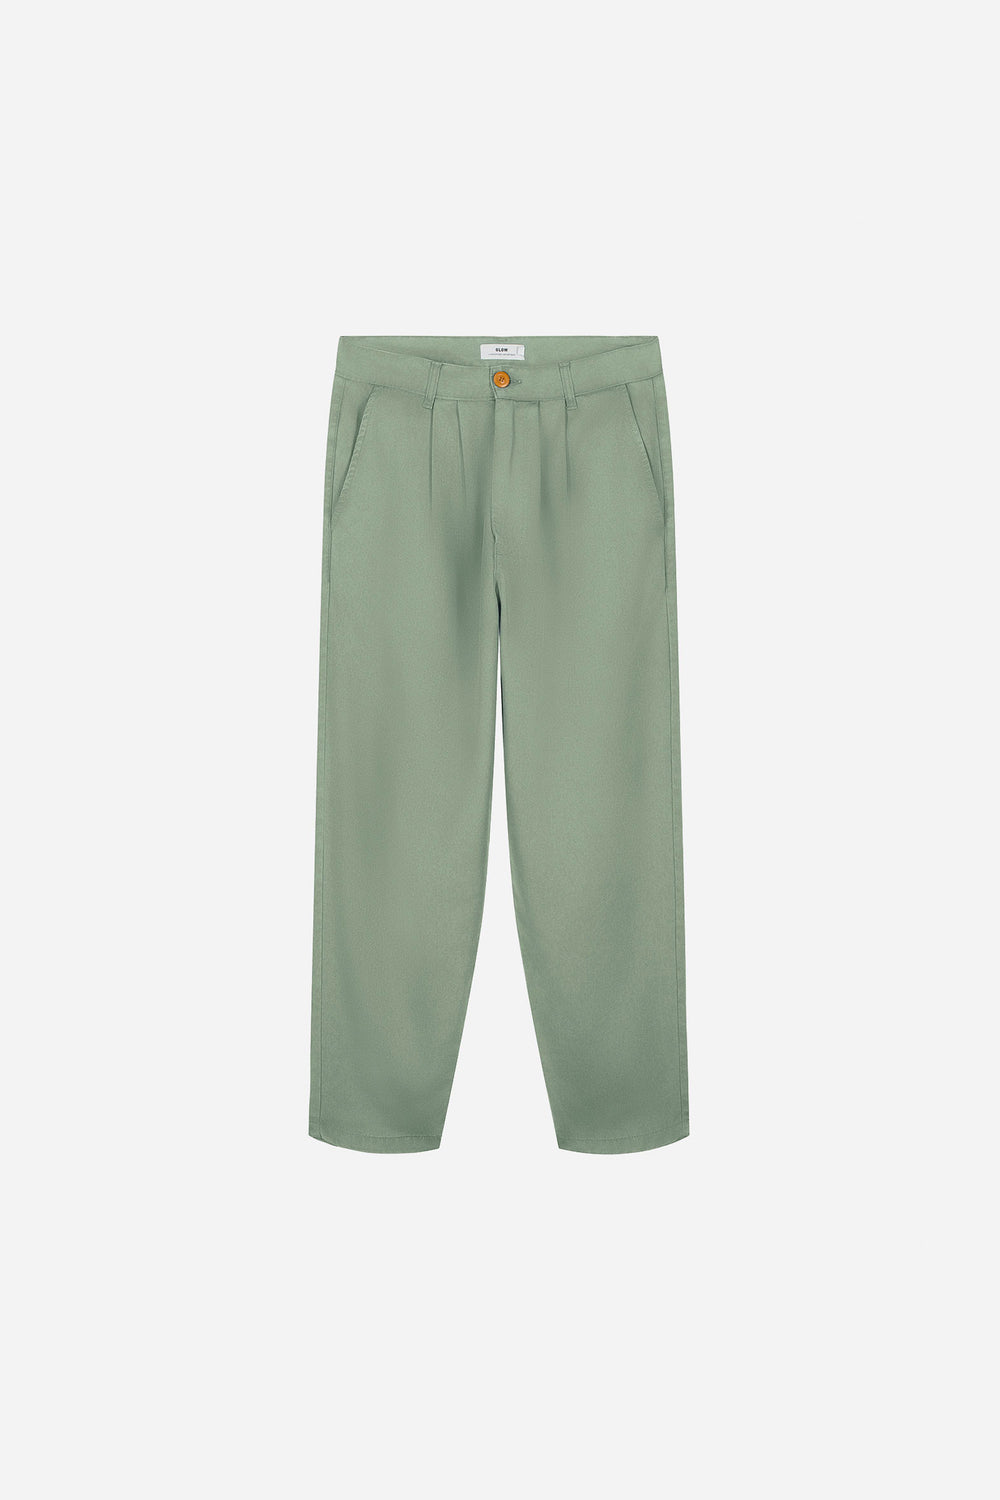 Pukas-surf-shop-Olow-GREEN-SAGE-SWING-TROUSERS